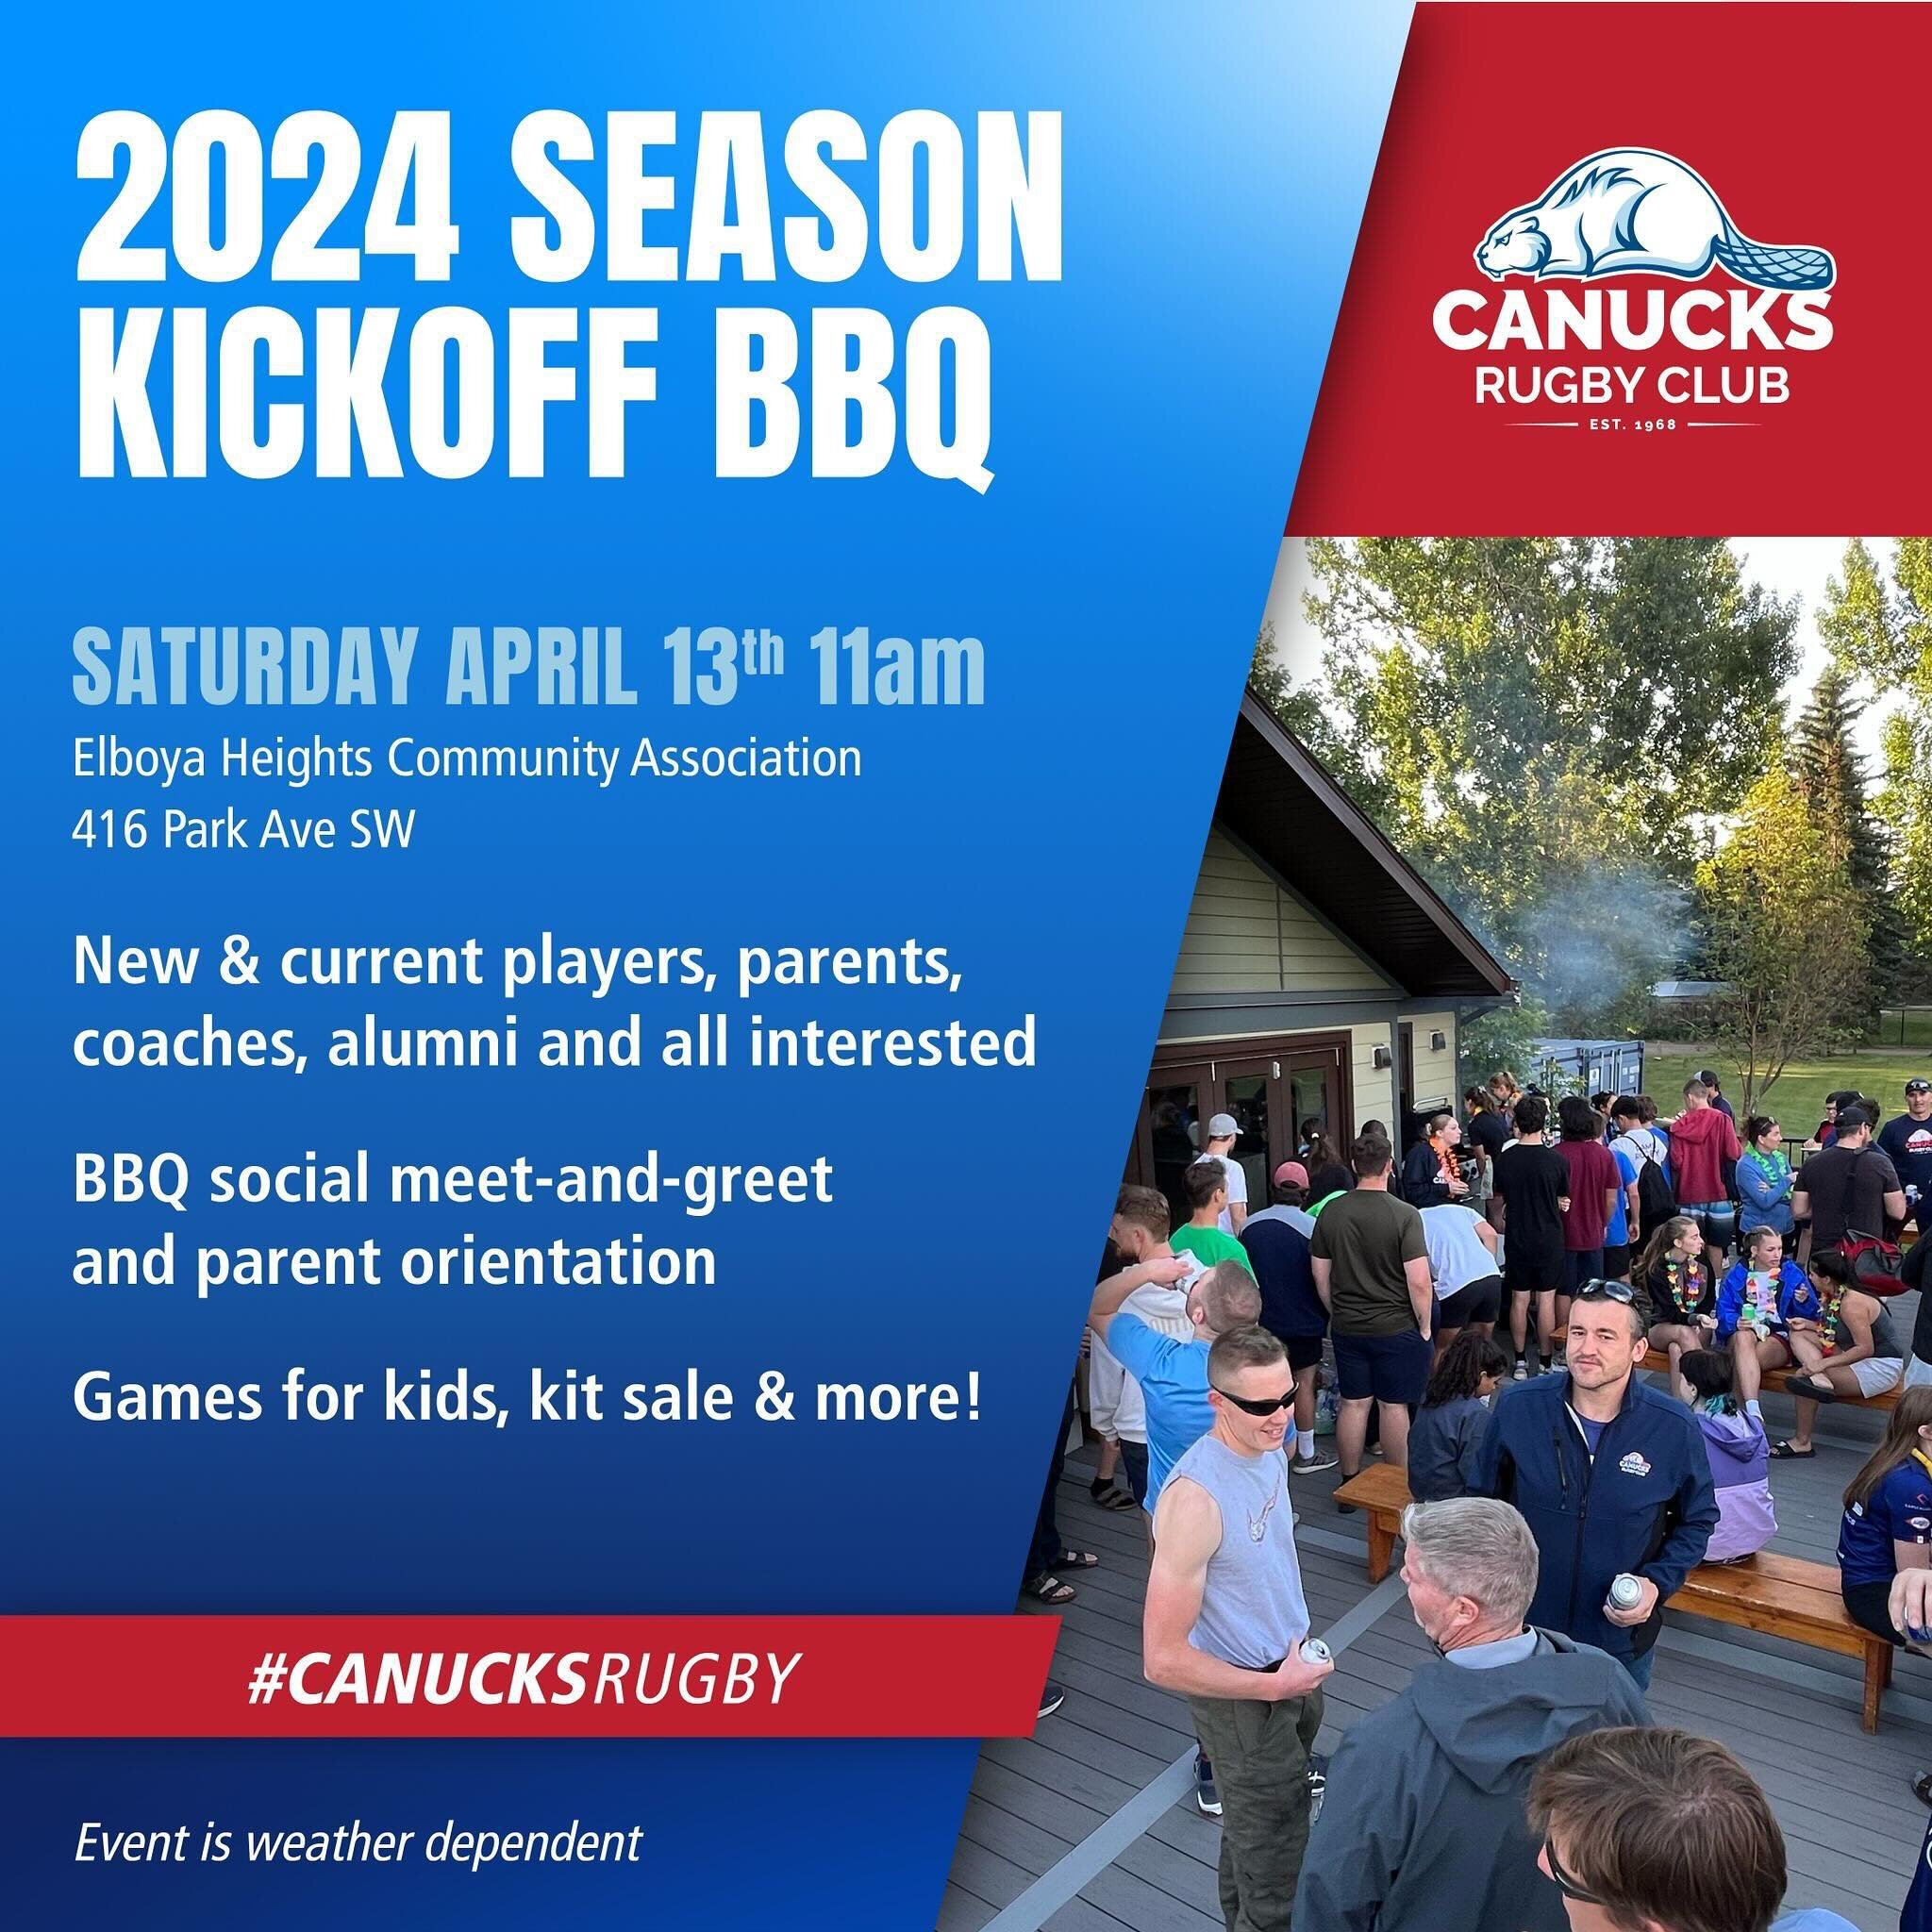 Save the date for our 2024 season kickoff BBQ on Saturday April 13 at our Stanley Park facility! There will be a Junior parent info session, meet &amp; great and more for our first social event of the year! 

We&rsquo;ll hopefully have nice enough we